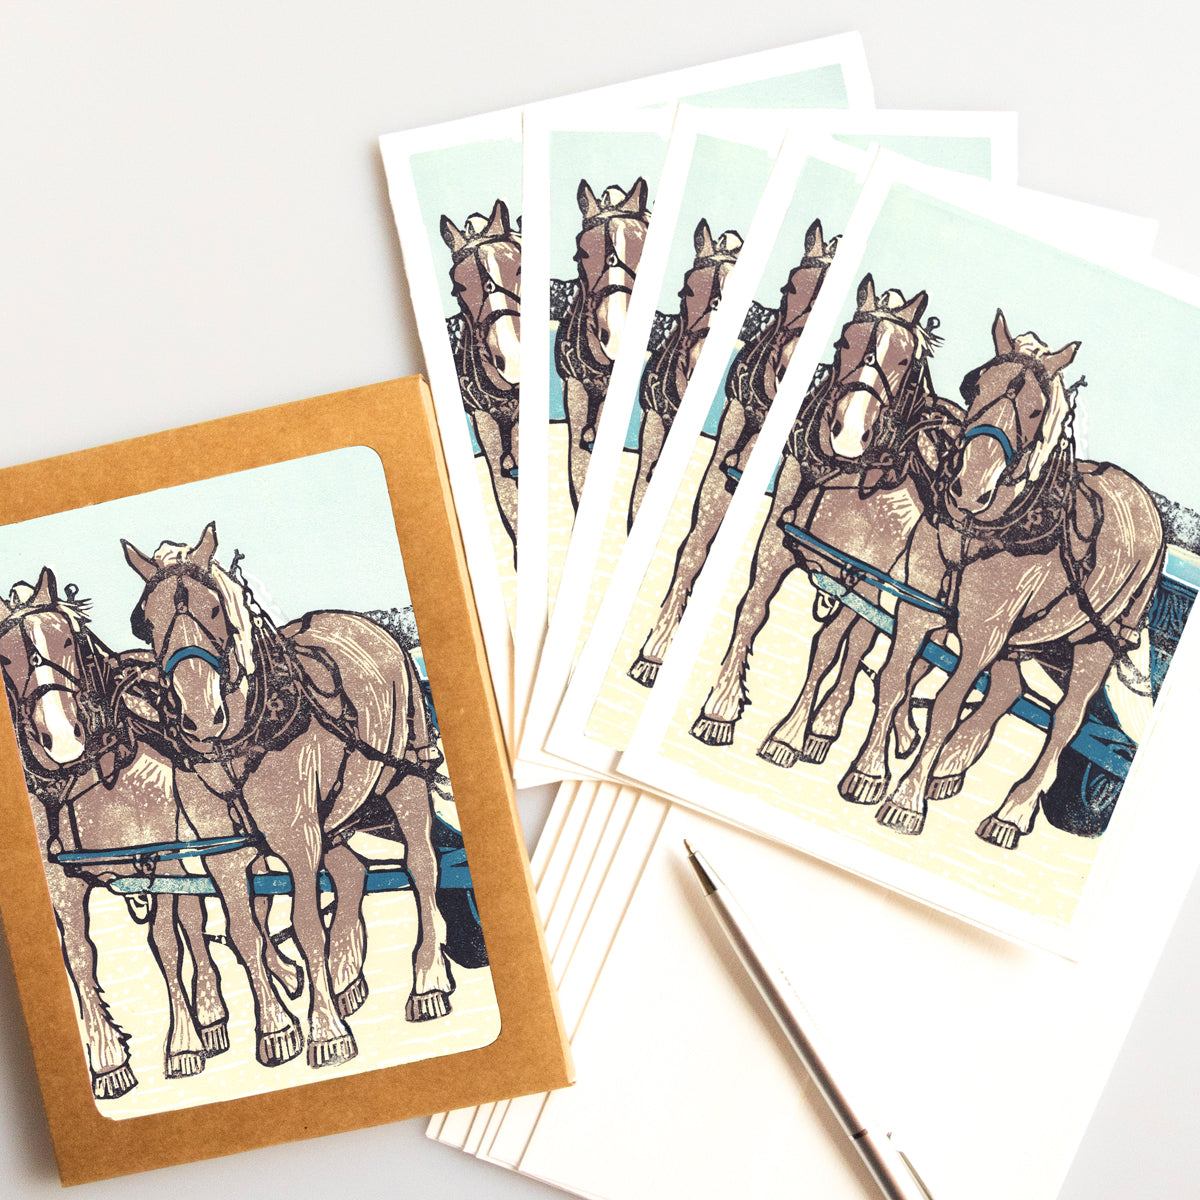 A casually elegant card set featuring horse art by Natalia Wohletz titled Dray Team on the Dock.